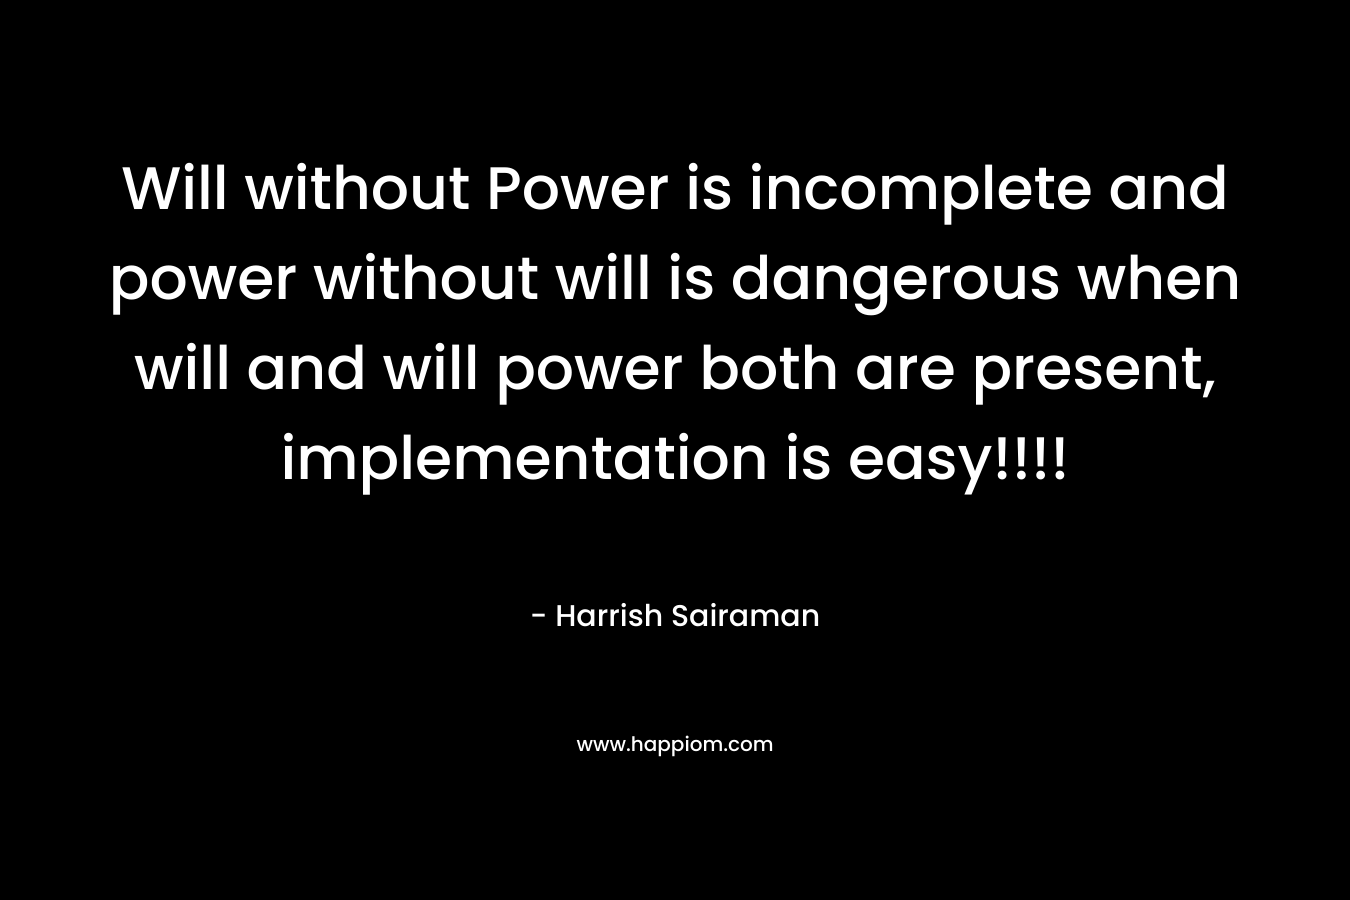 Will without Power is incomplete and power without will is dangerous when will and will power both are present, implementation is easy!!!!